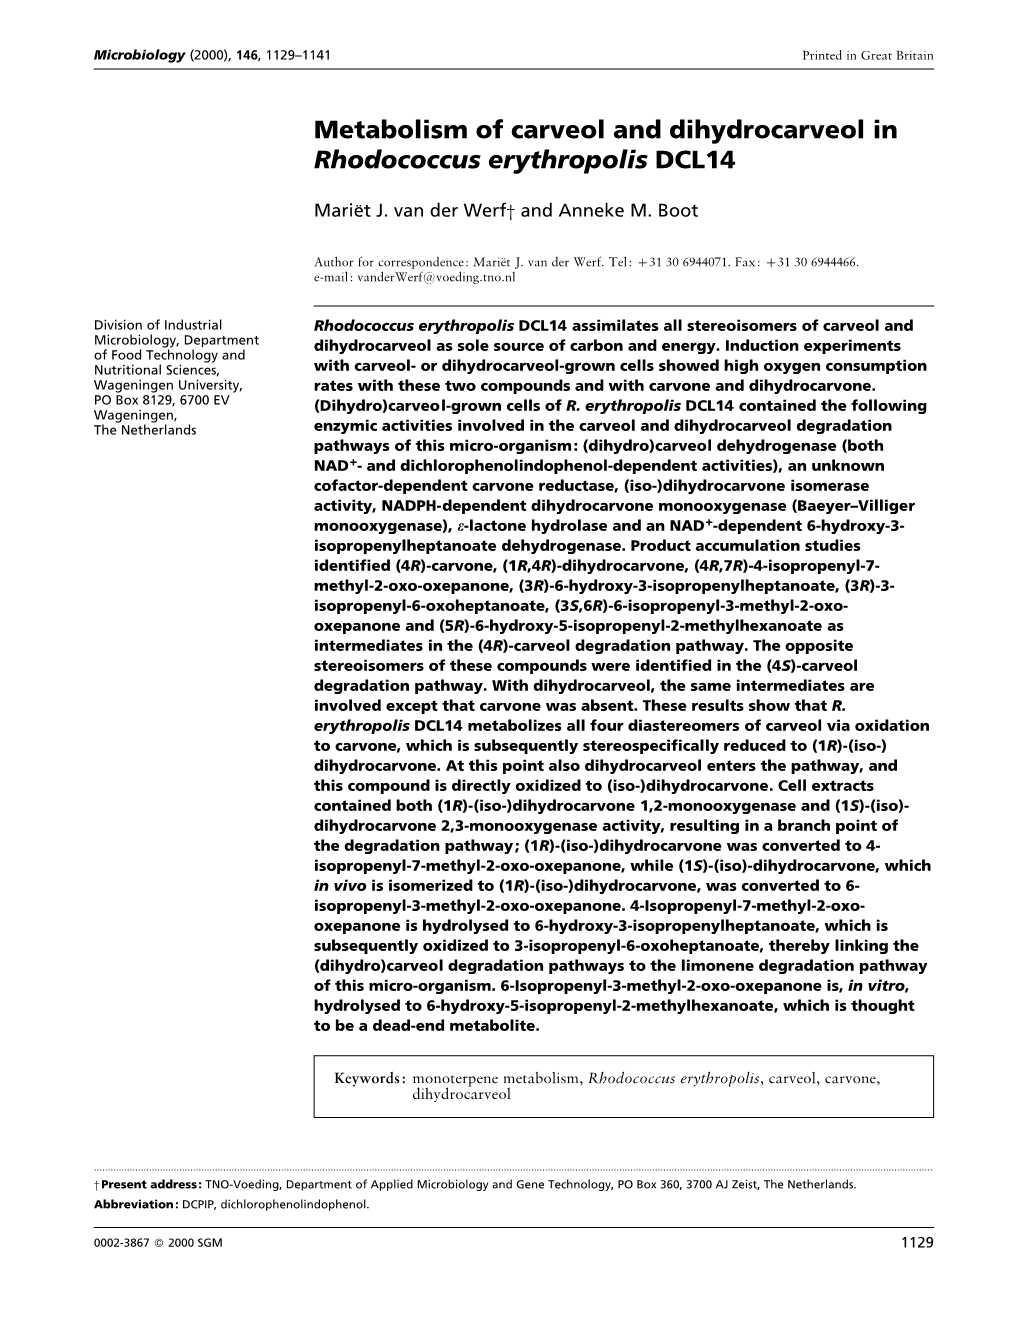 Metabolism of Carveol and Dihydrocarveol in Rhodococcus Erythropolis DCL14